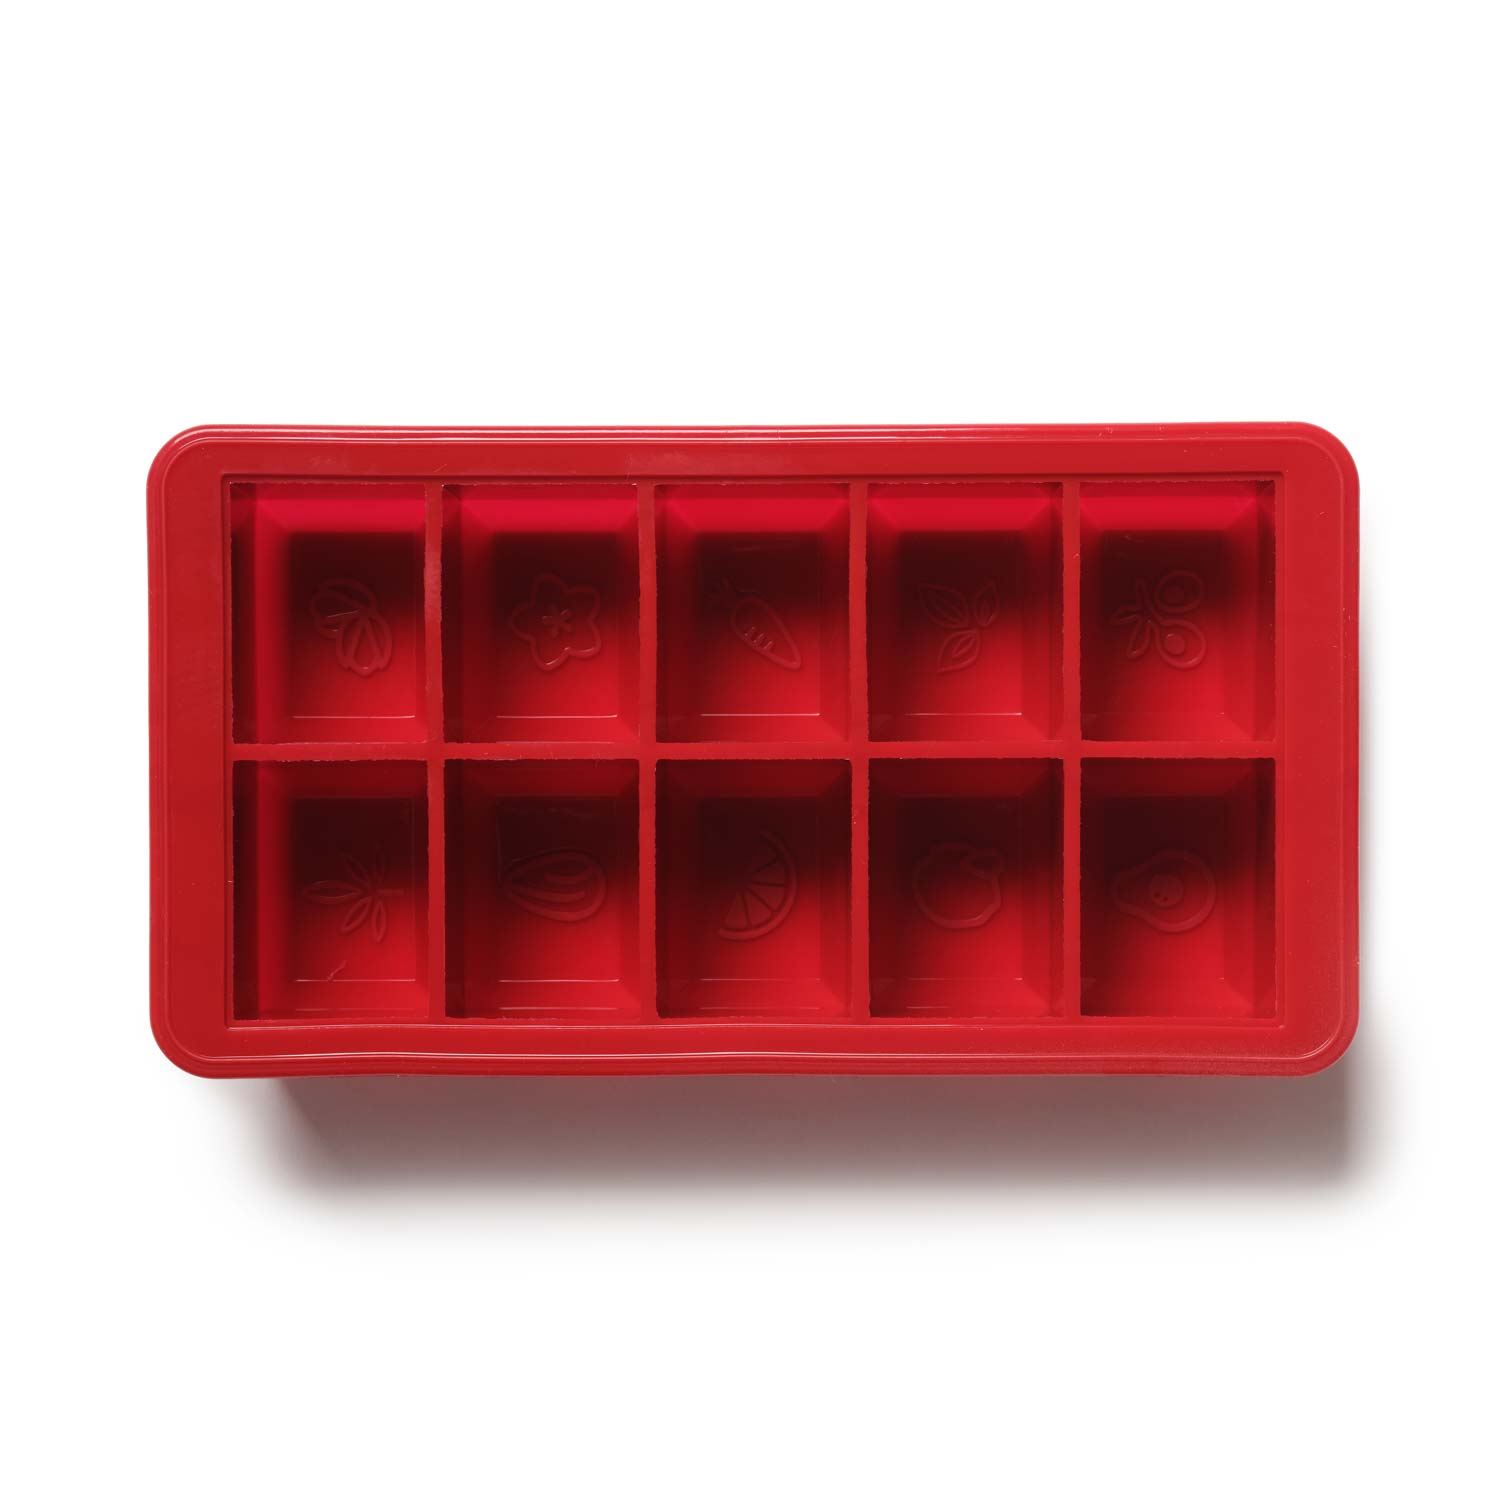 LEVO oil herb block tray red without cap